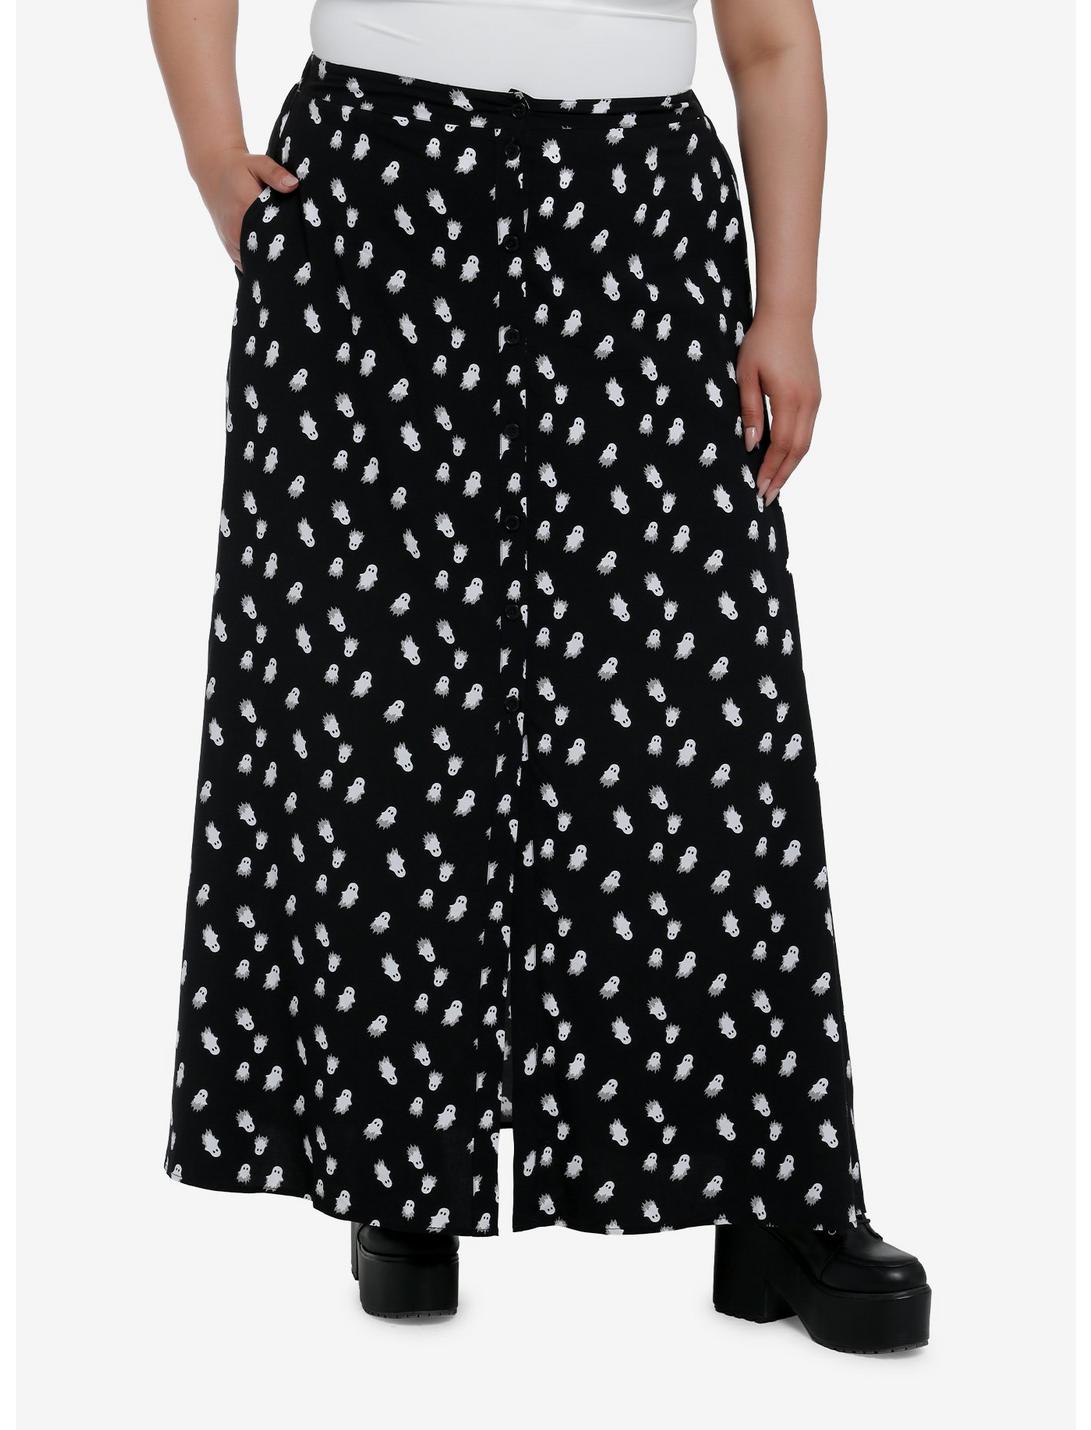 Thorn & Fable Black & White Ghost Maxi Skirt Plus Size, , hi-res